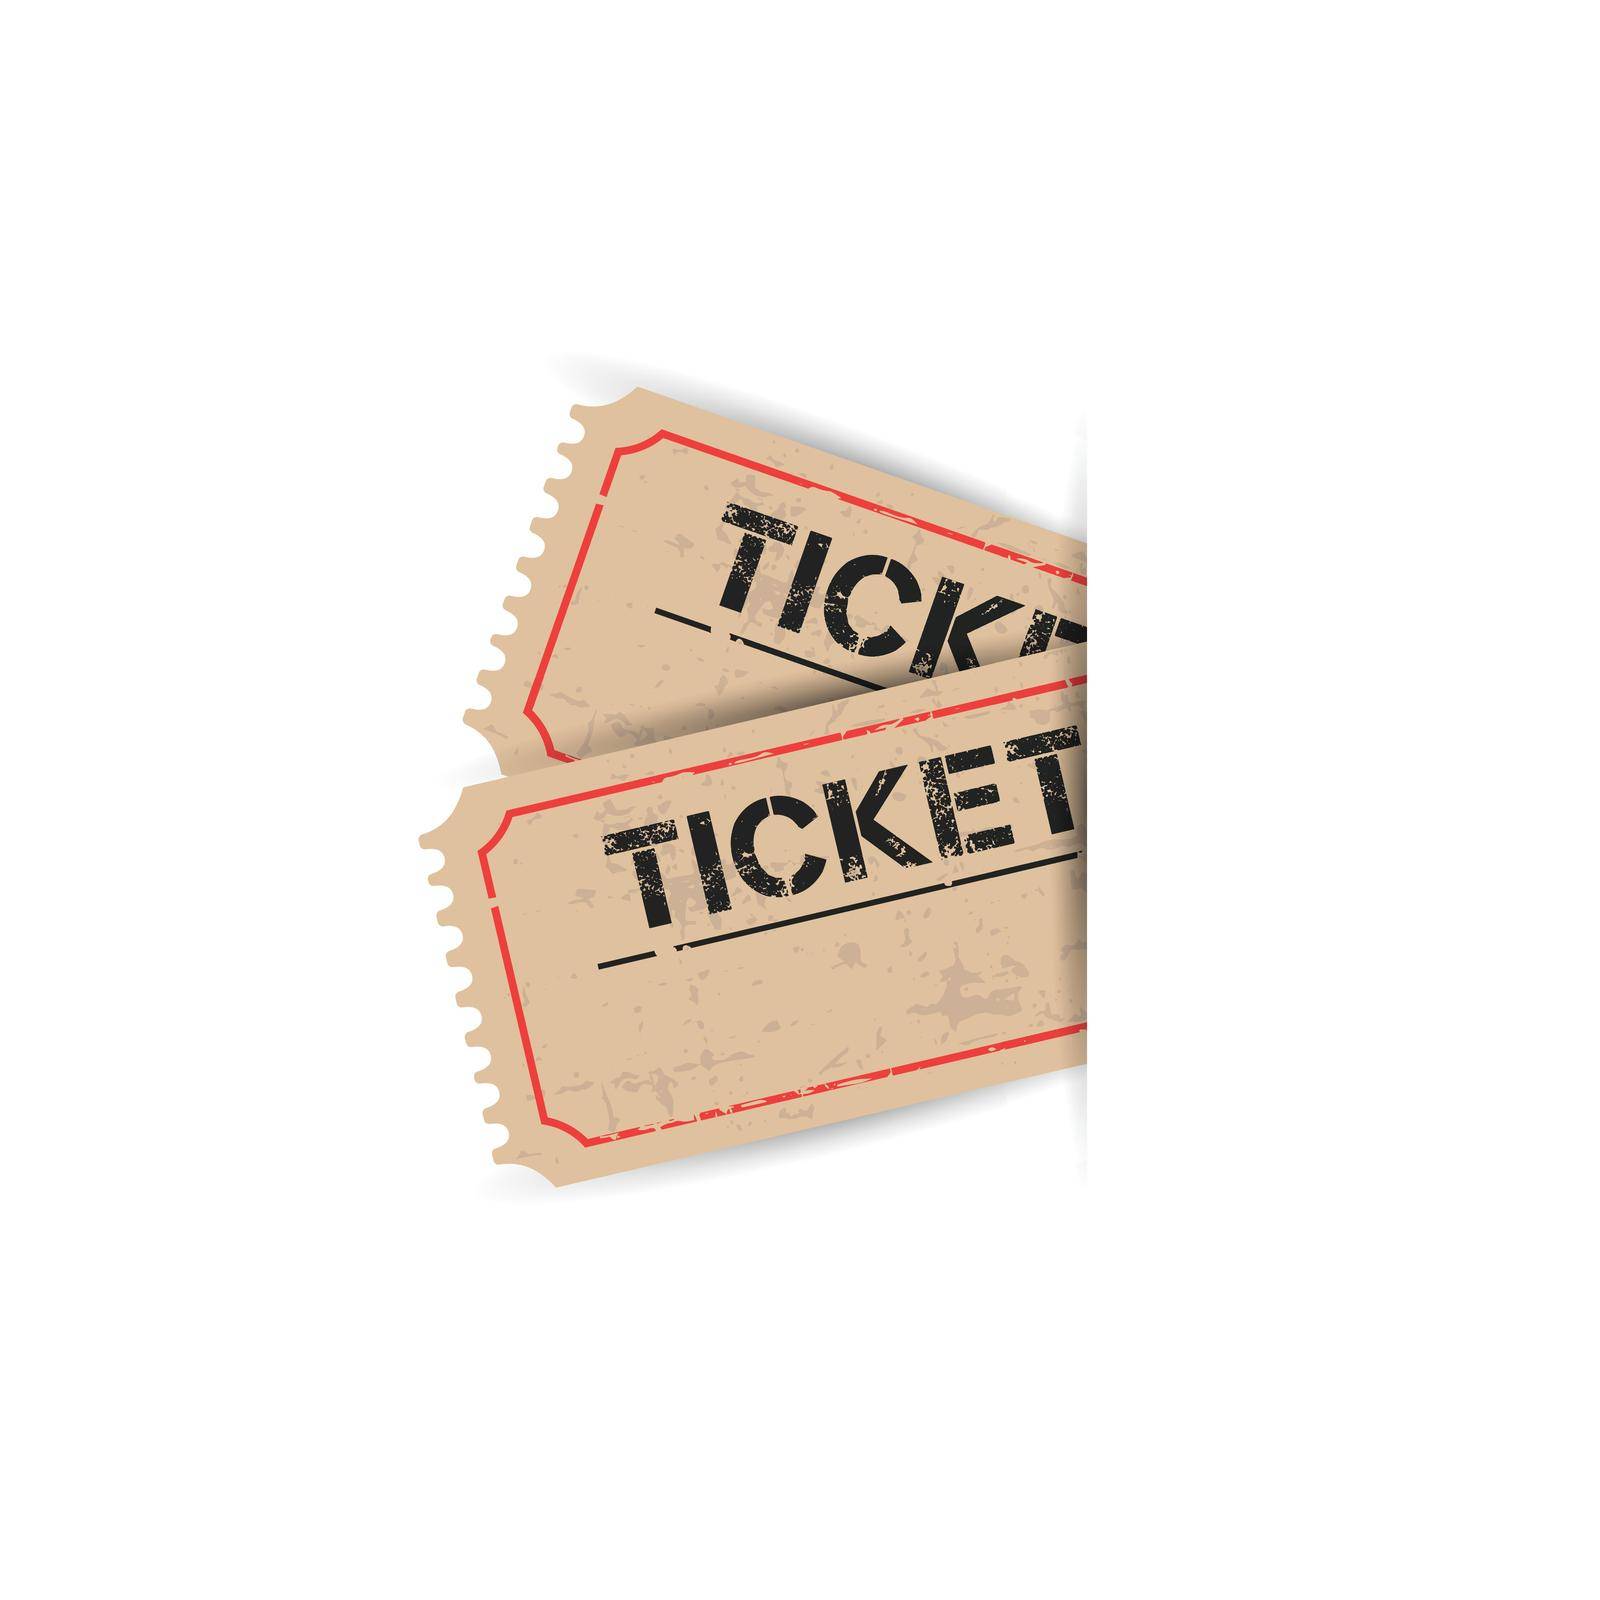 Old ticket with grunge effect. Flat vector illustration on white background. by LysenkoA